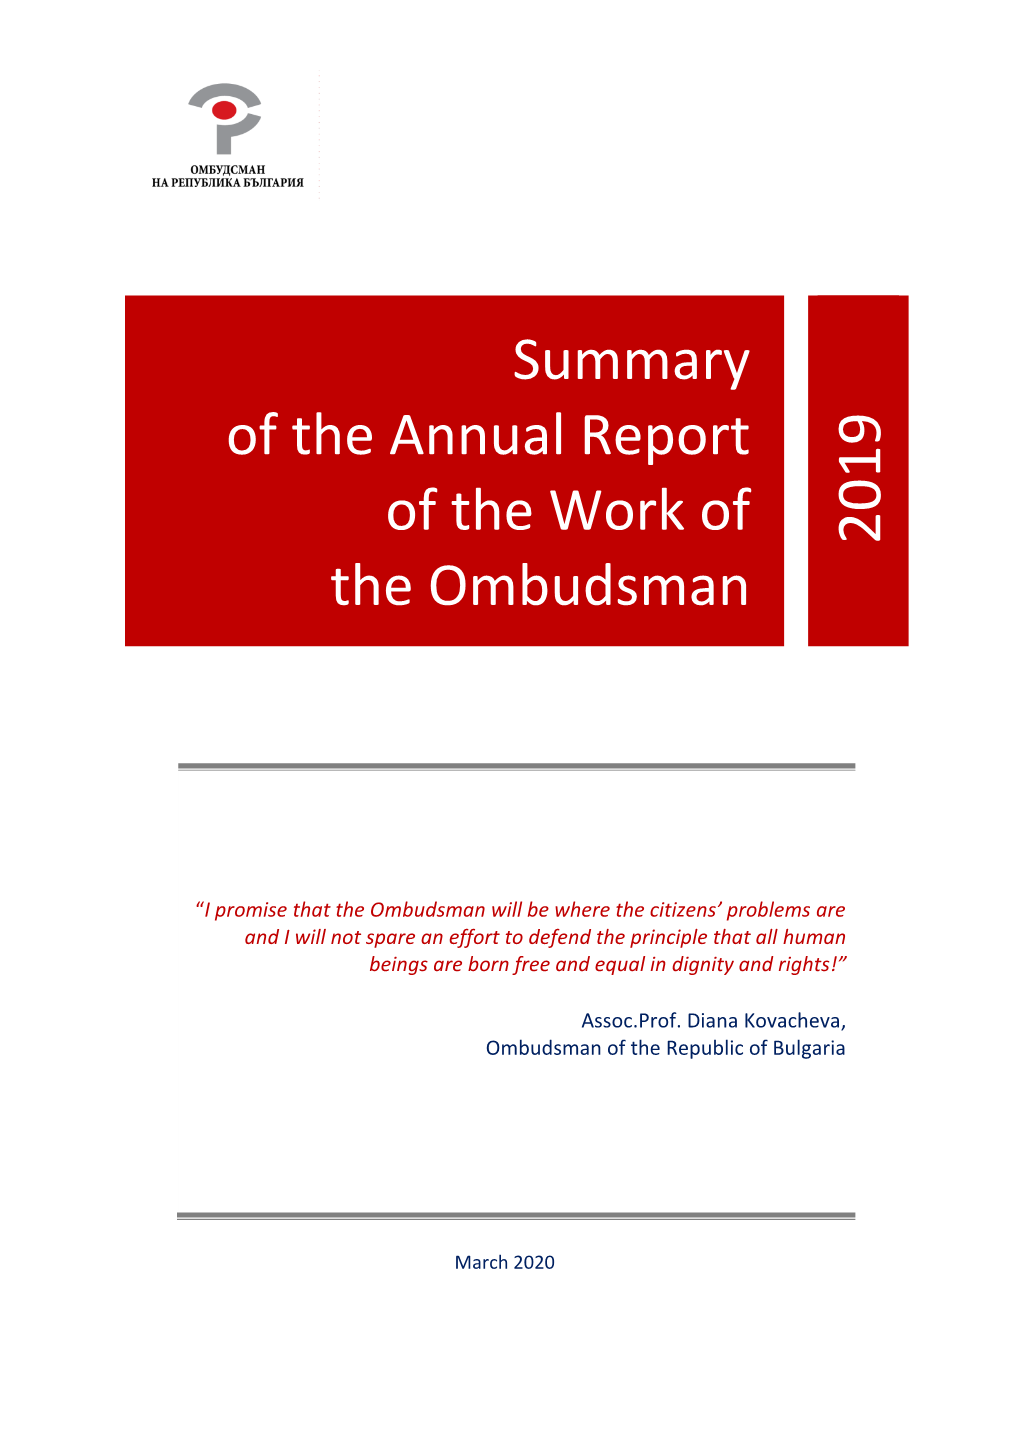 Summary of the Annual Report of the Work of the Ombudsman